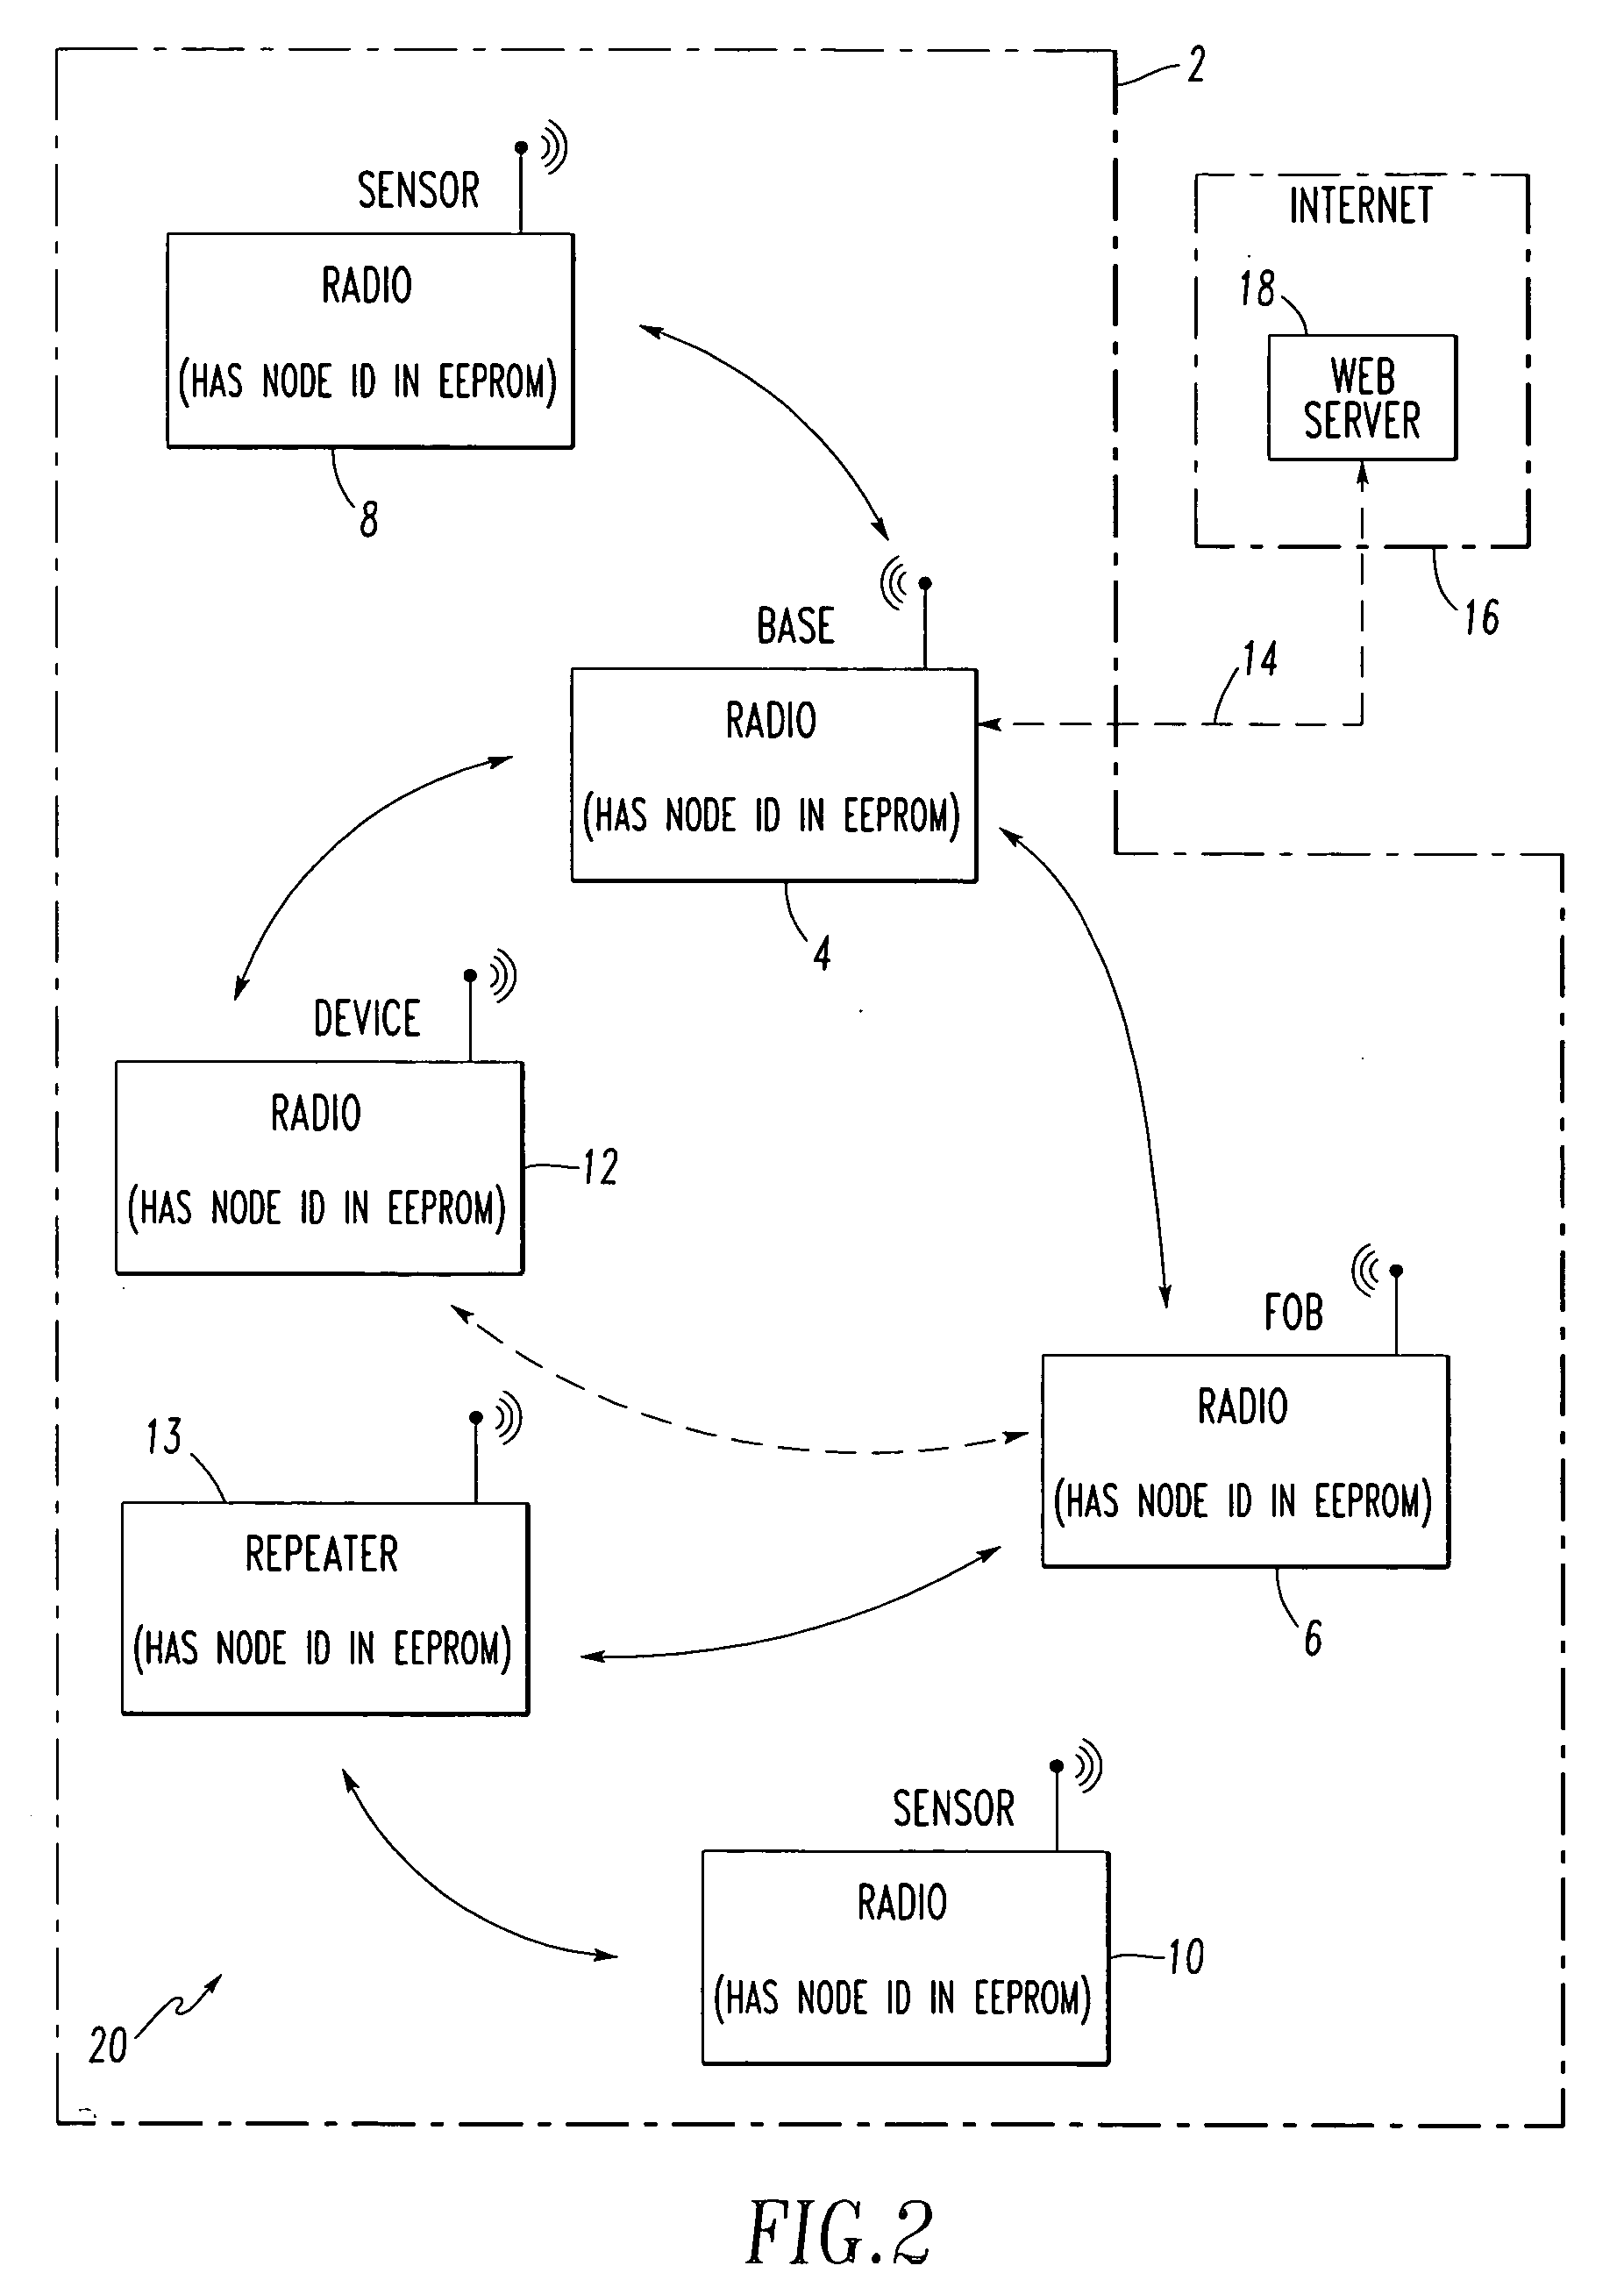 Method and communication system employing secure key exchange for encoding and decoding messages between nodes of a communication network